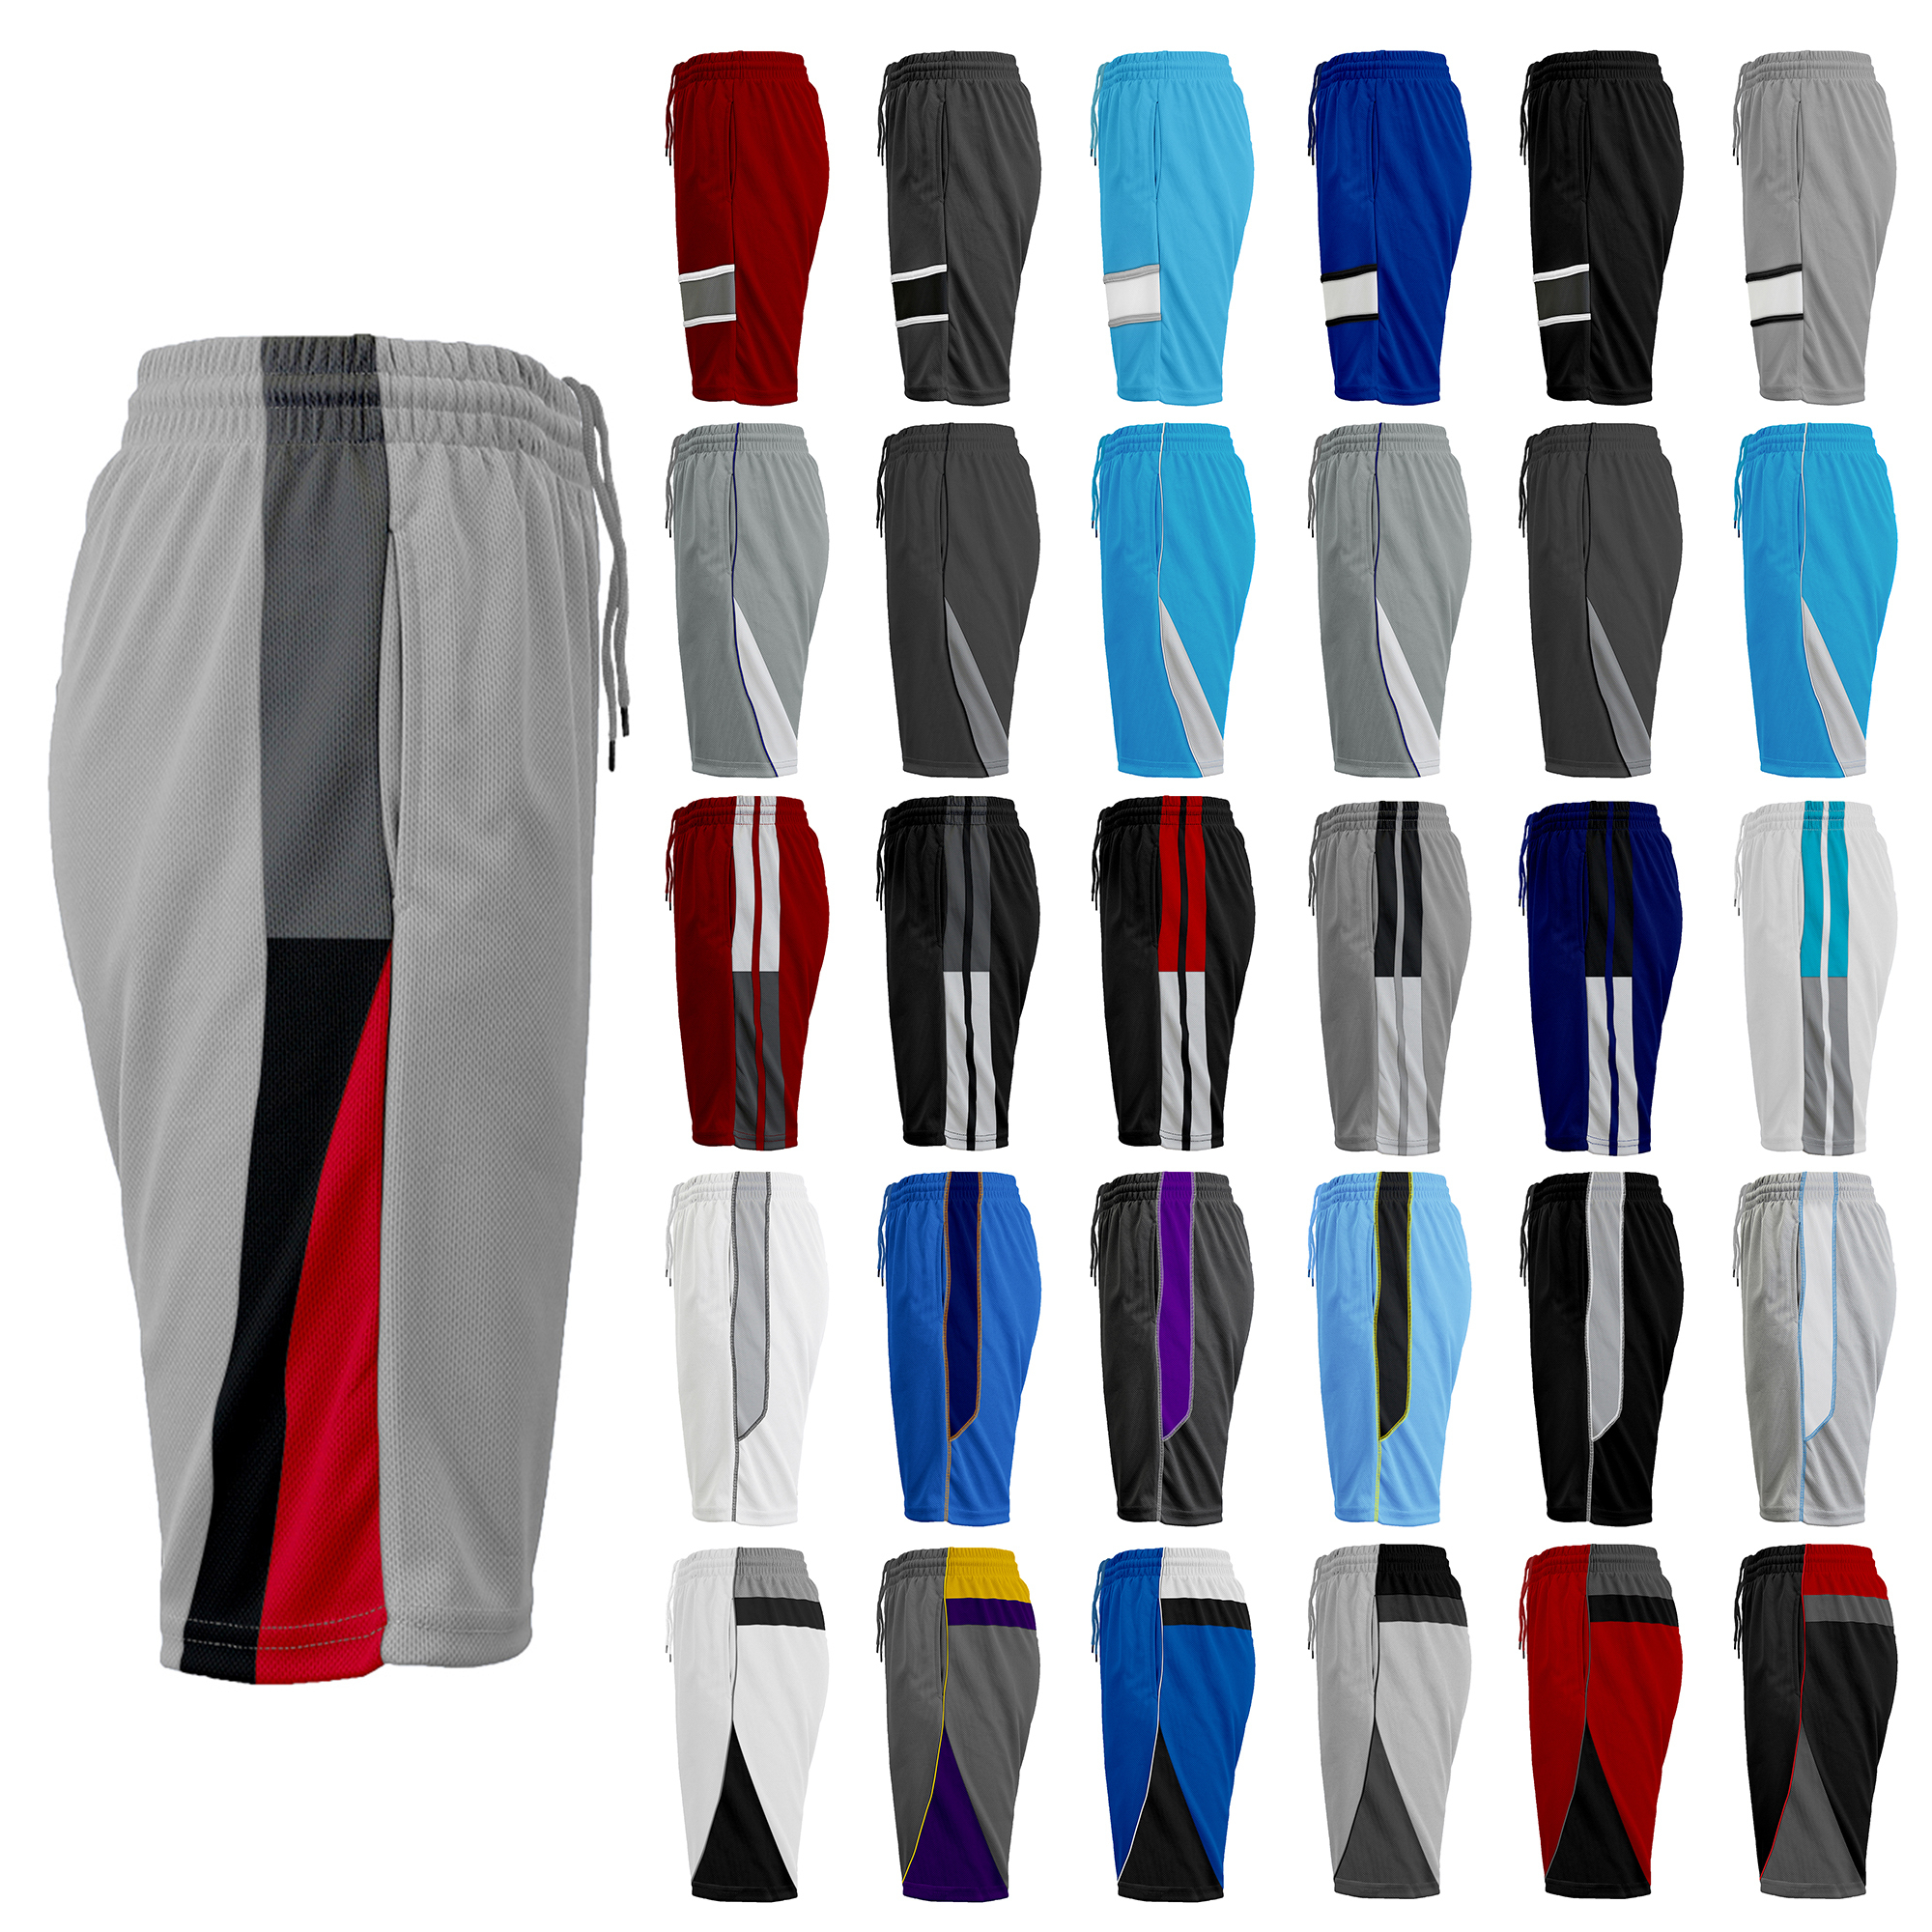 5-Pack: Men's Active Summer Athletic Mesh Moisture-Wicking Performance Shorts - Small